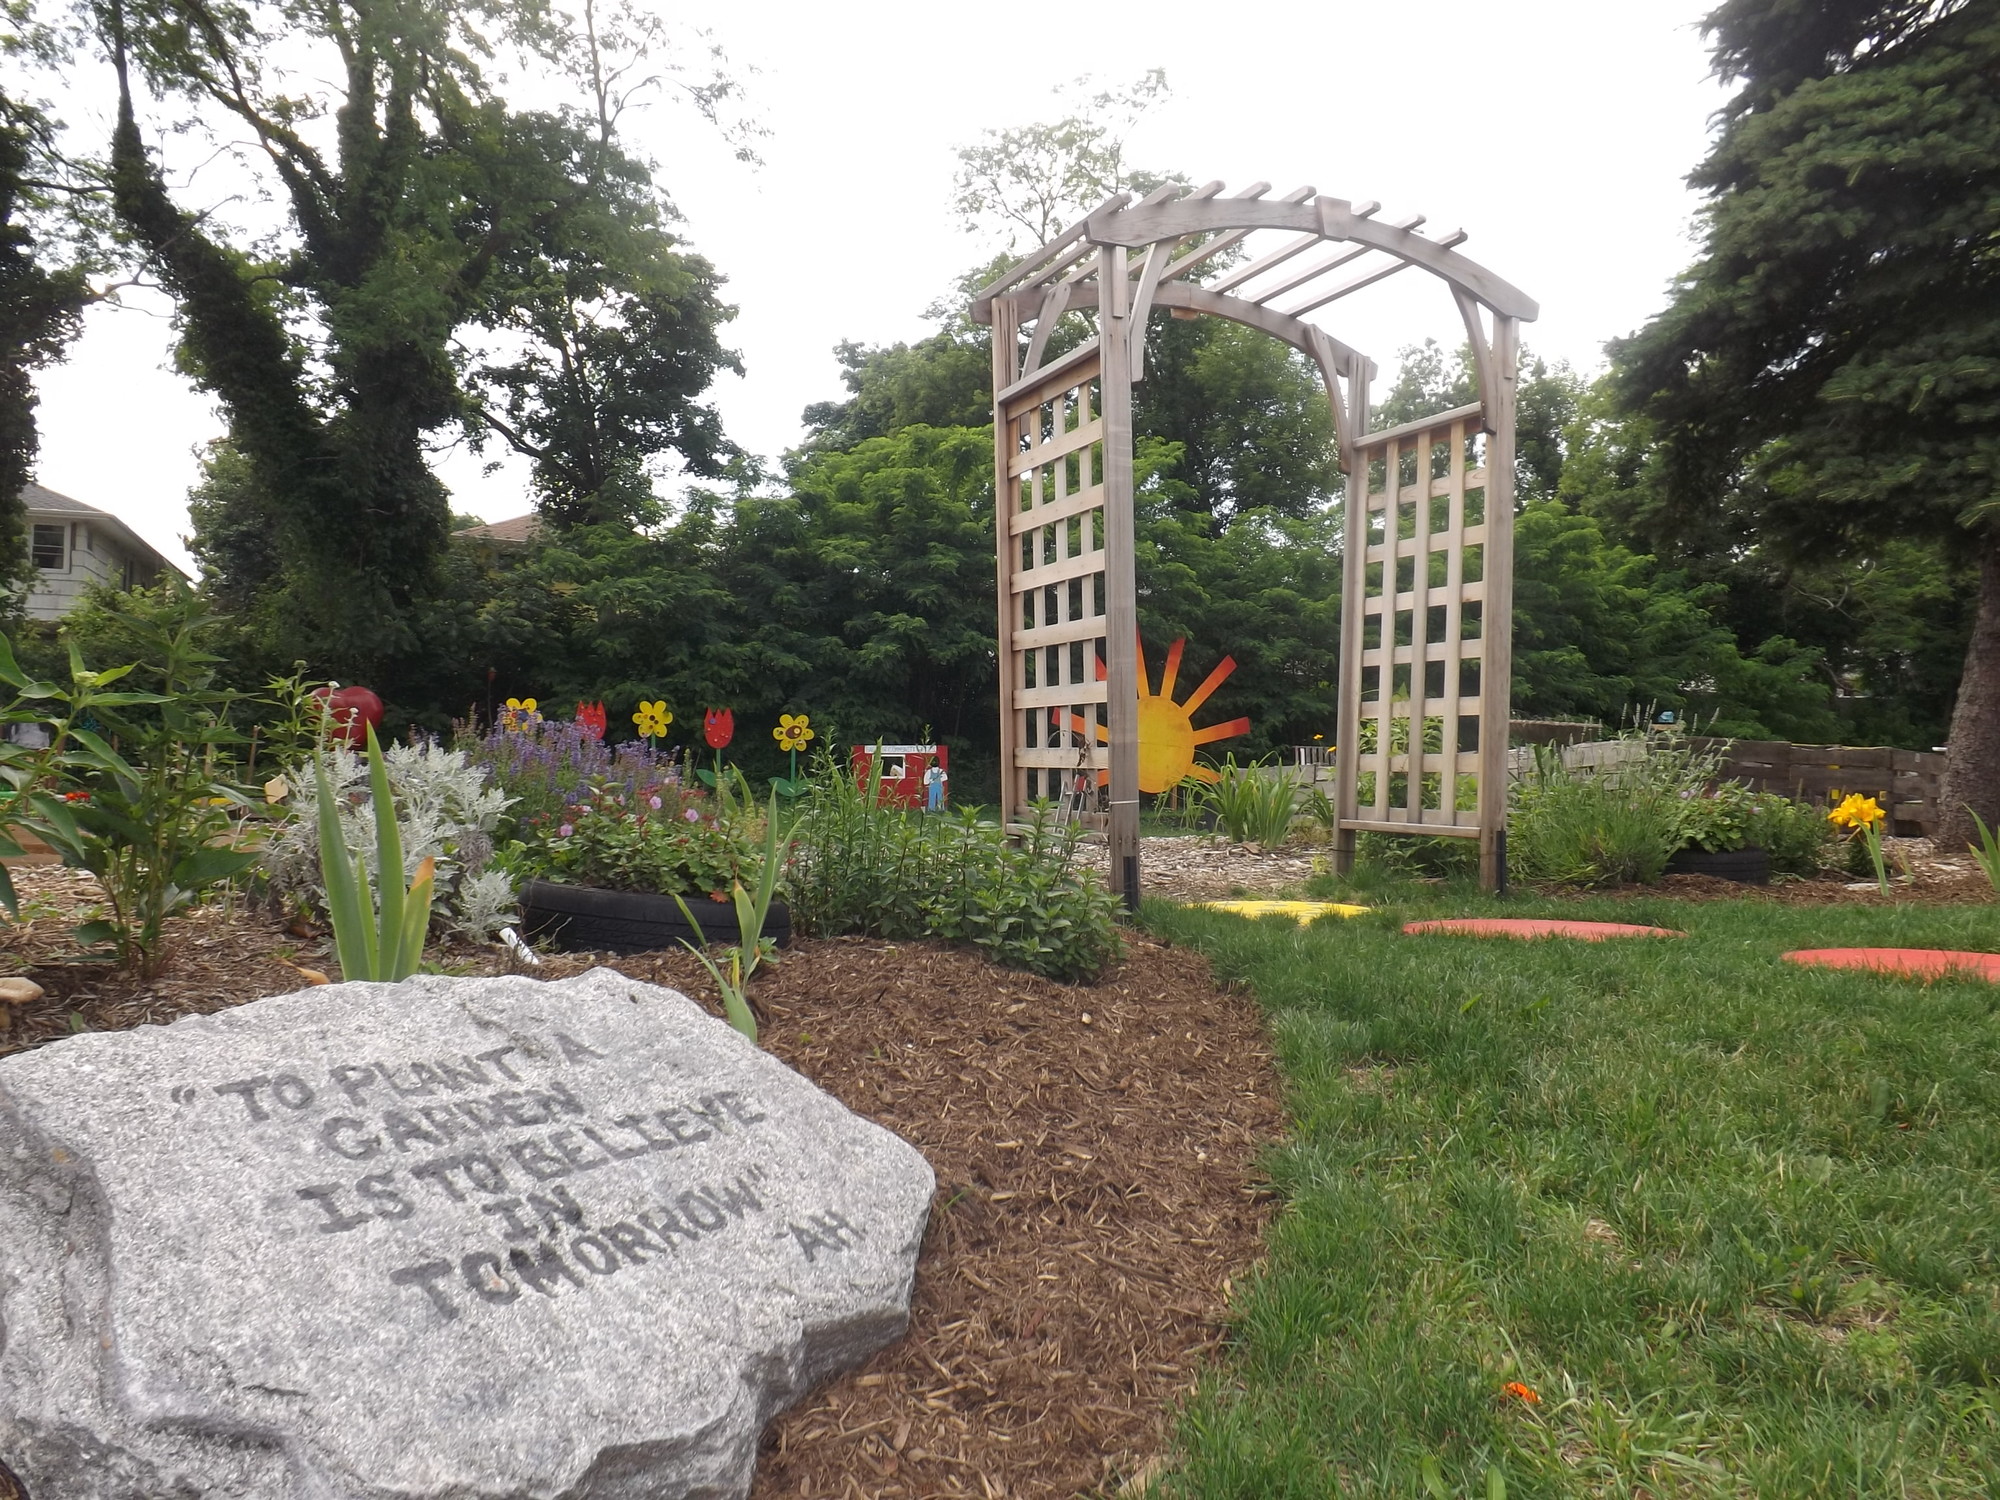 The garden is funded mostly by donations from community members and some money set aside by the Baldwin Civic Association.